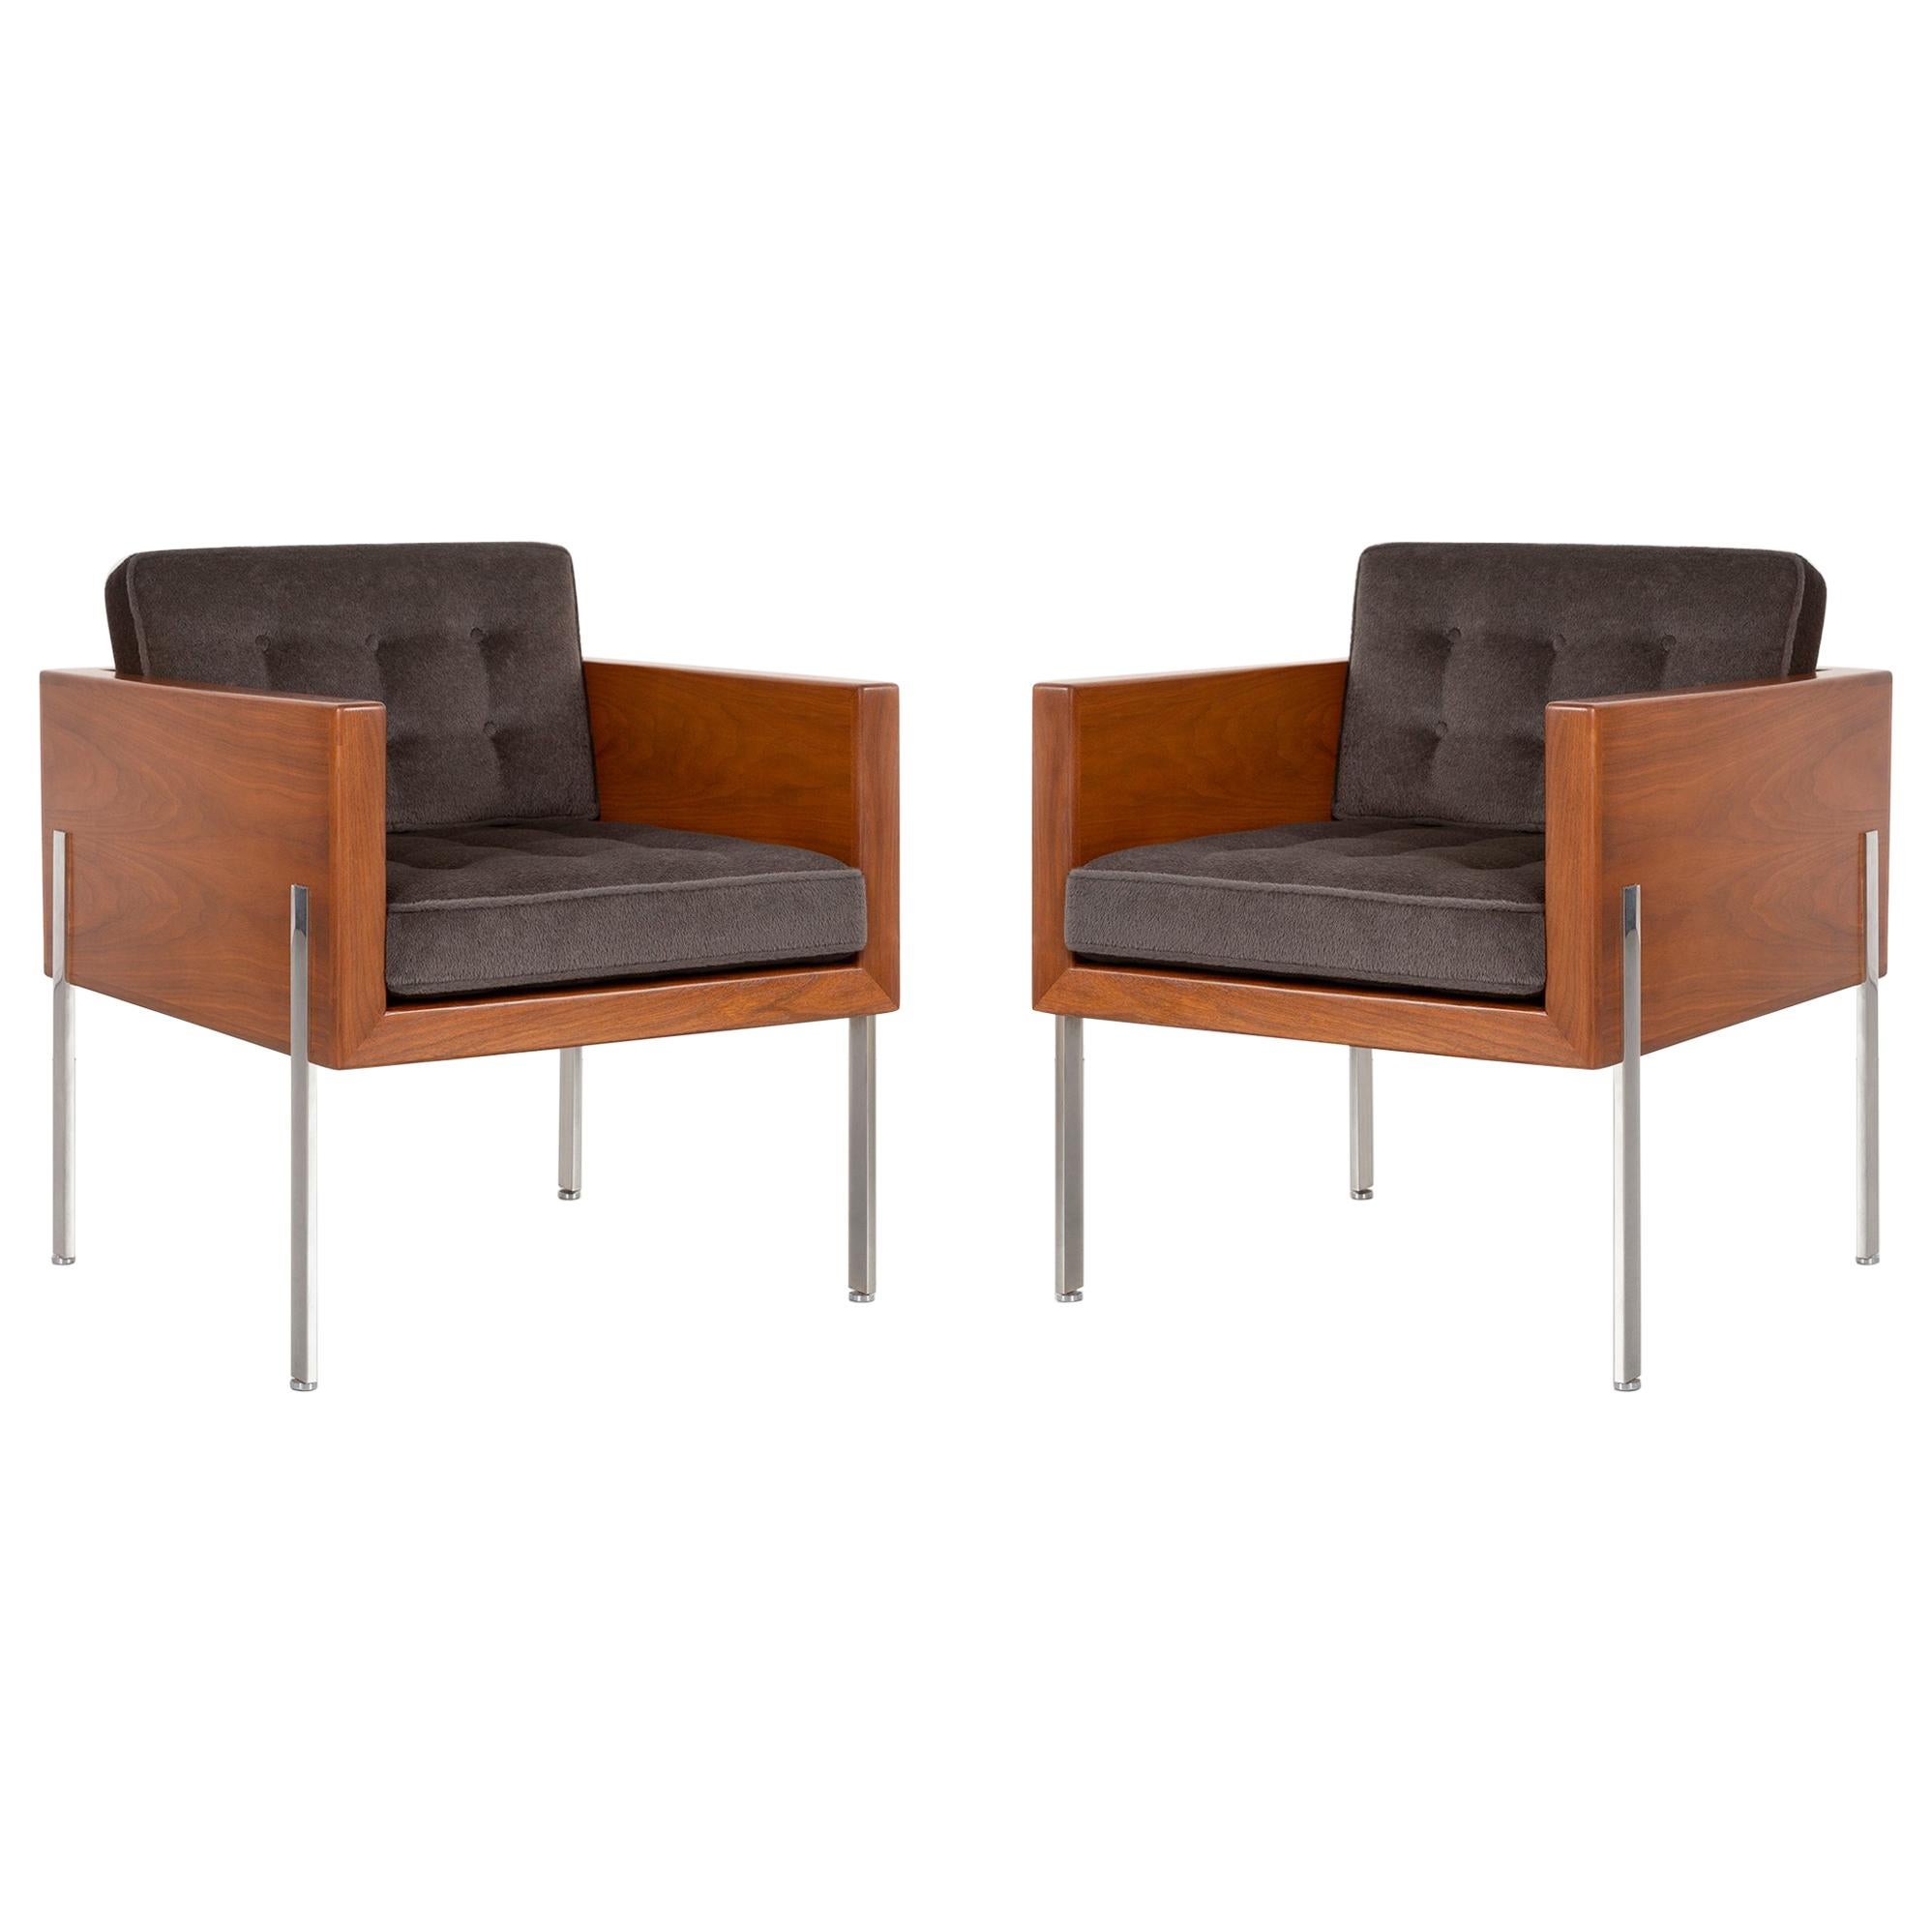 Pair of Mid-Century Modern Harvey Probber Architectural Series Cube Chairs For Sale